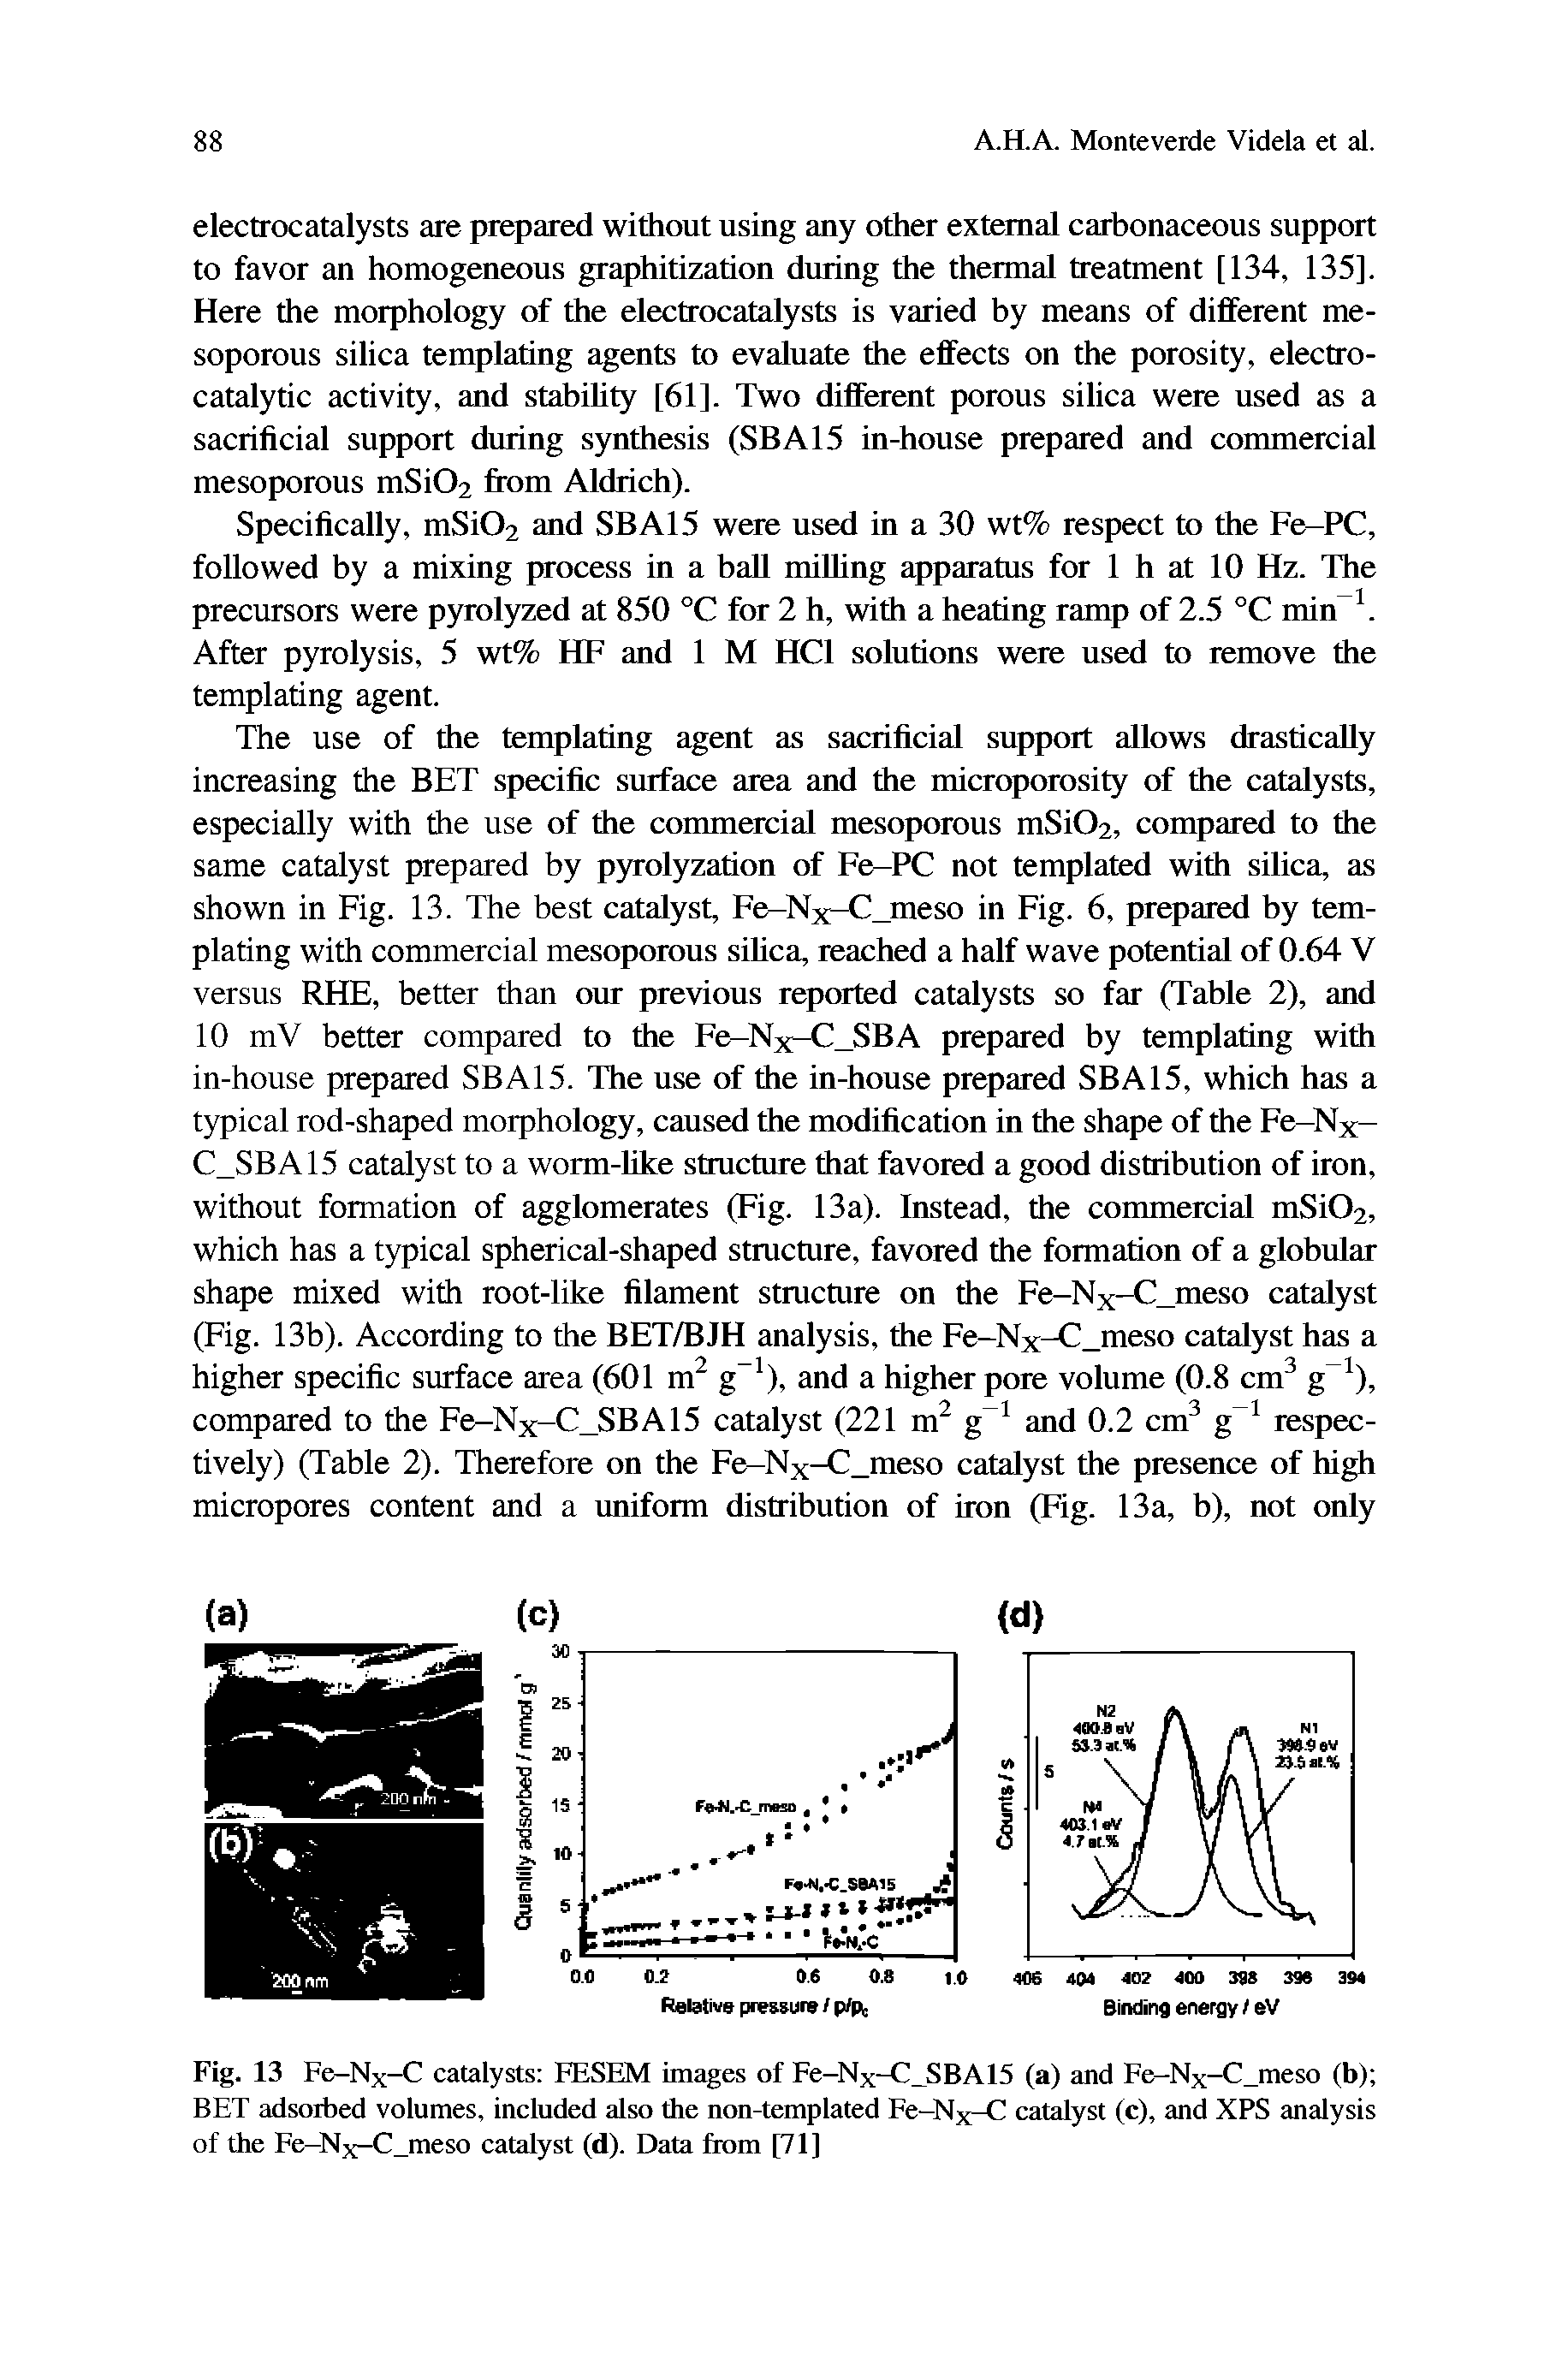 Fig. 13 Fe-Nx-C catalysts EESEM images of Fe-Nx-C SBA15 (a) and Fe-Nx-C meso (b) BET adsorbed volumes, included also the non-templated Fe—Nx-C catalyst (c), and XPS analysis of the Fe-Nx-C meso catalyst (d). Data from [71]...